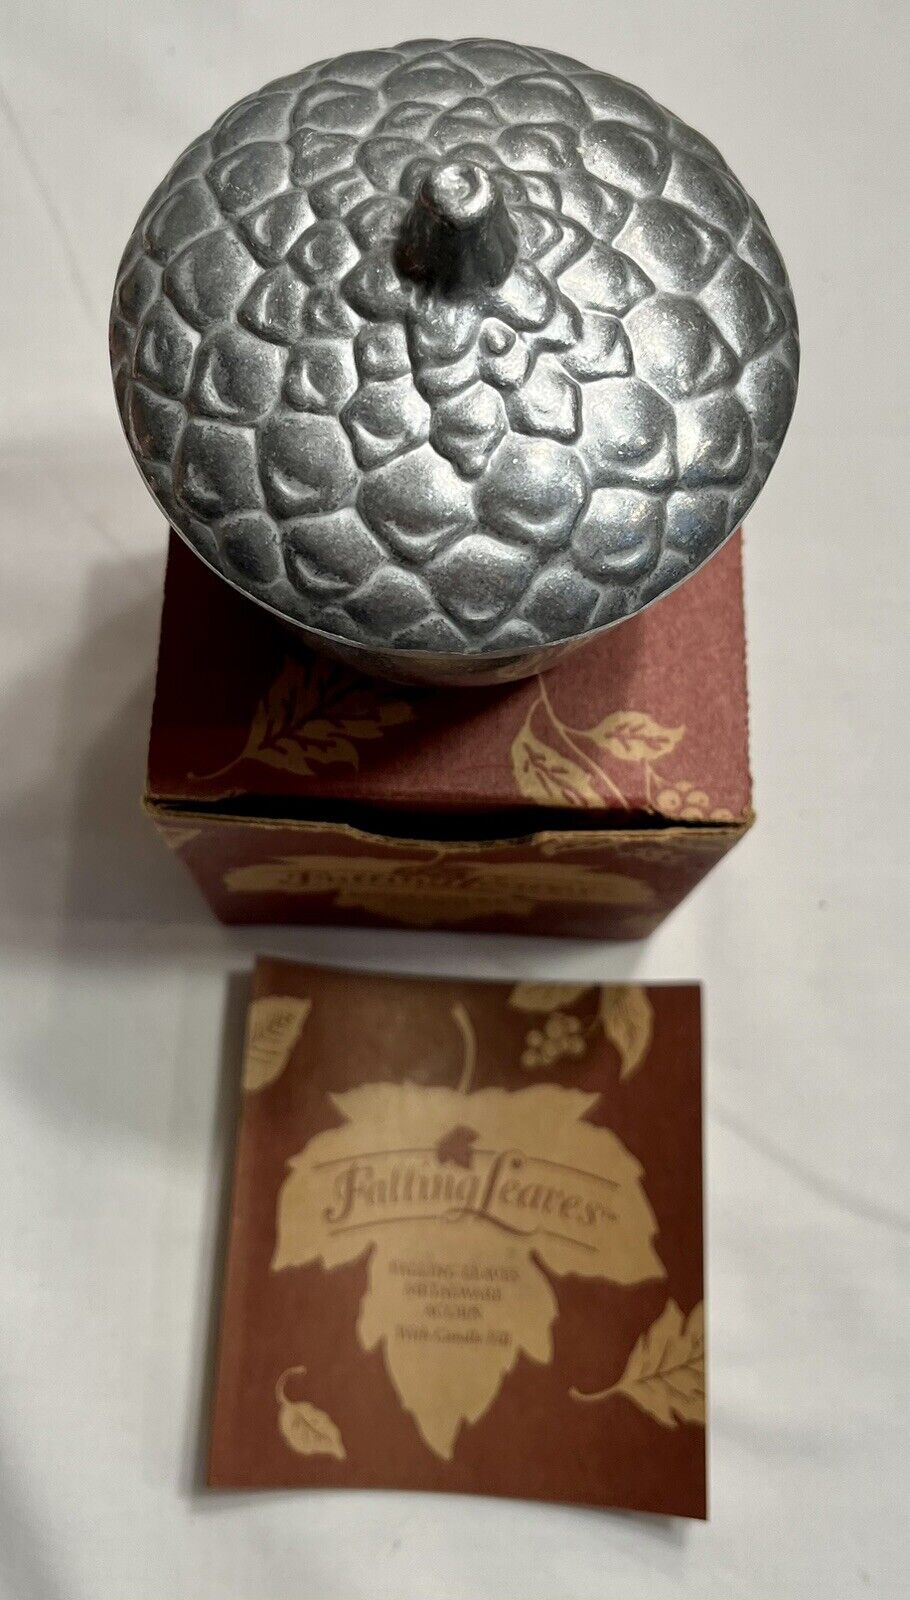 Longaberger 2002 Falling Leaves Metalware Acorn With Candle #77508 - Made In USA